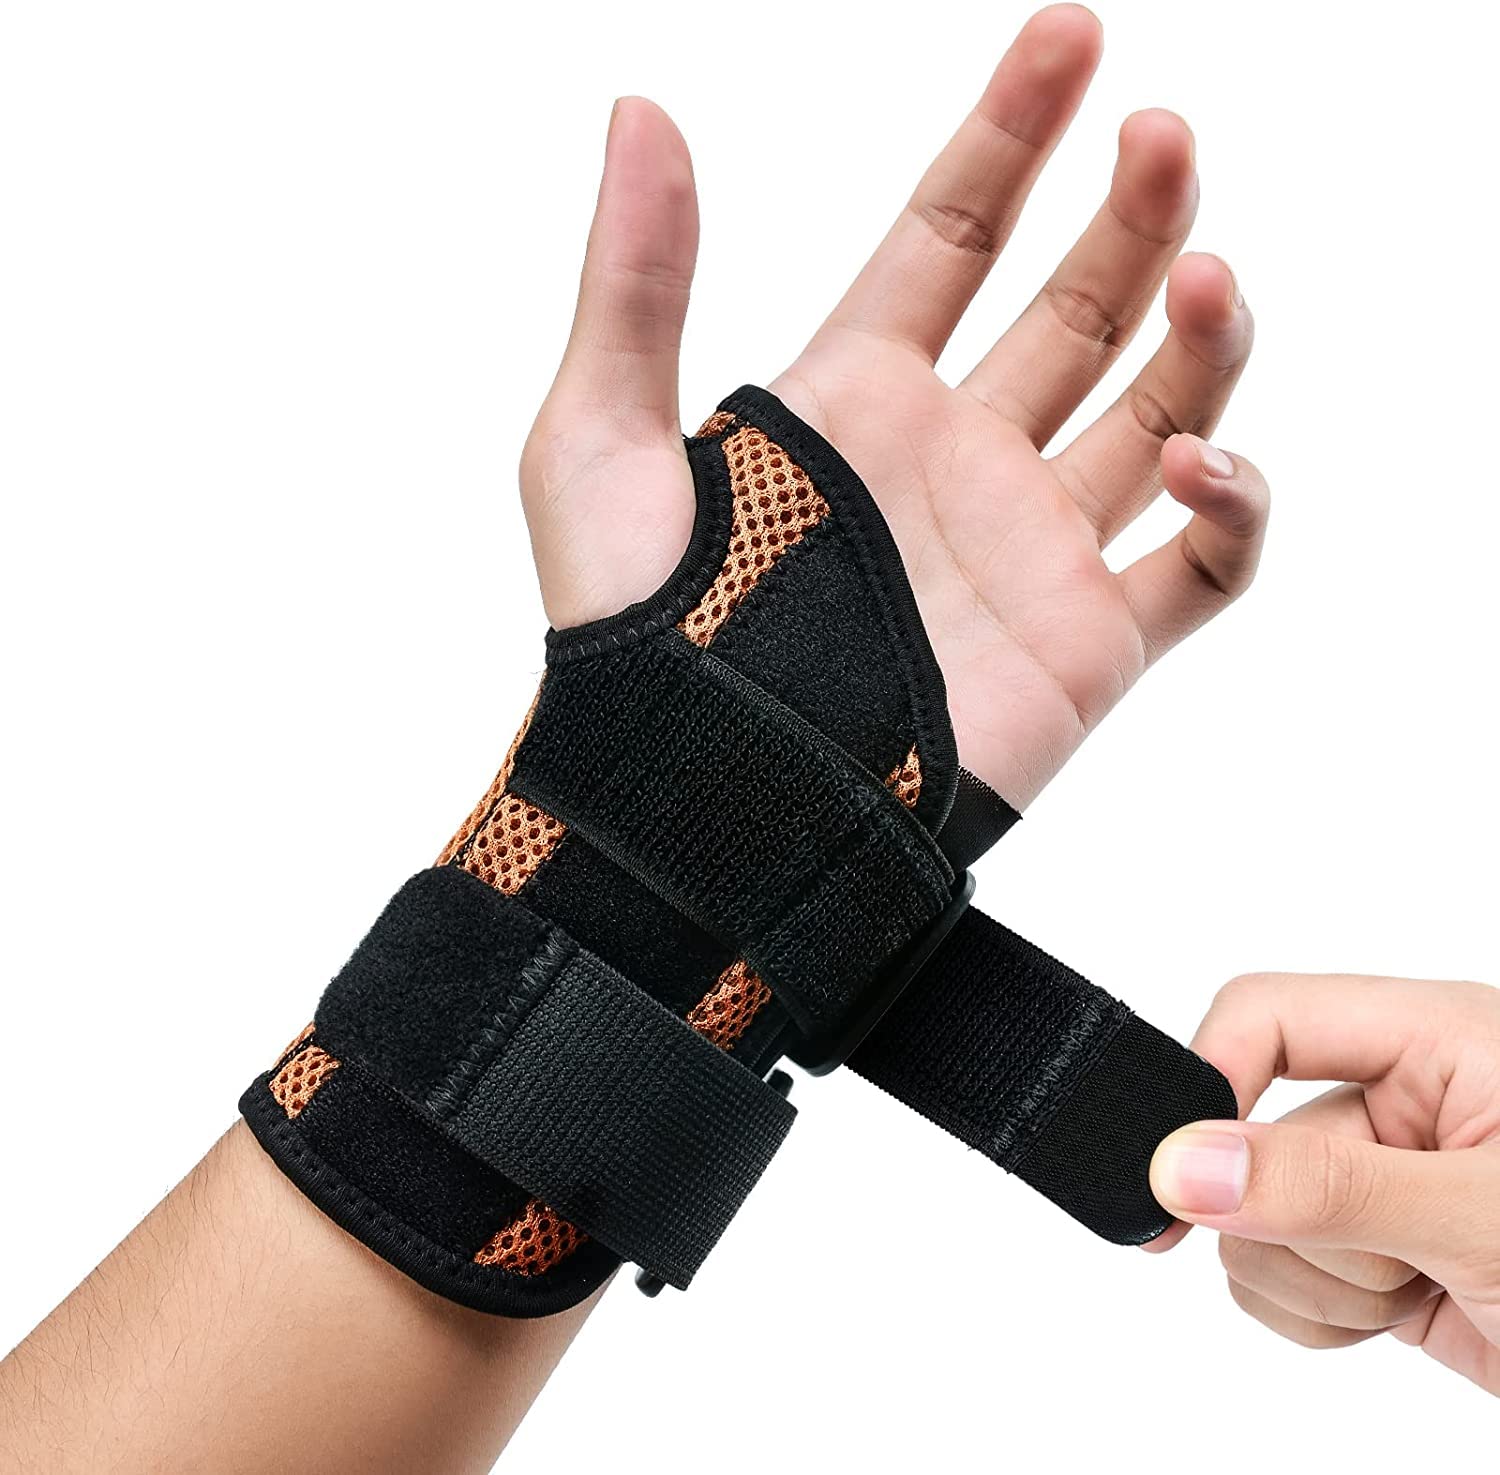  ComfyBrace Copper Infused Wrist Brace/Hand Brace/Wrist  Support For Carpal Tunnel Syndrome, Arthritis, Tendonitis For Men And Women